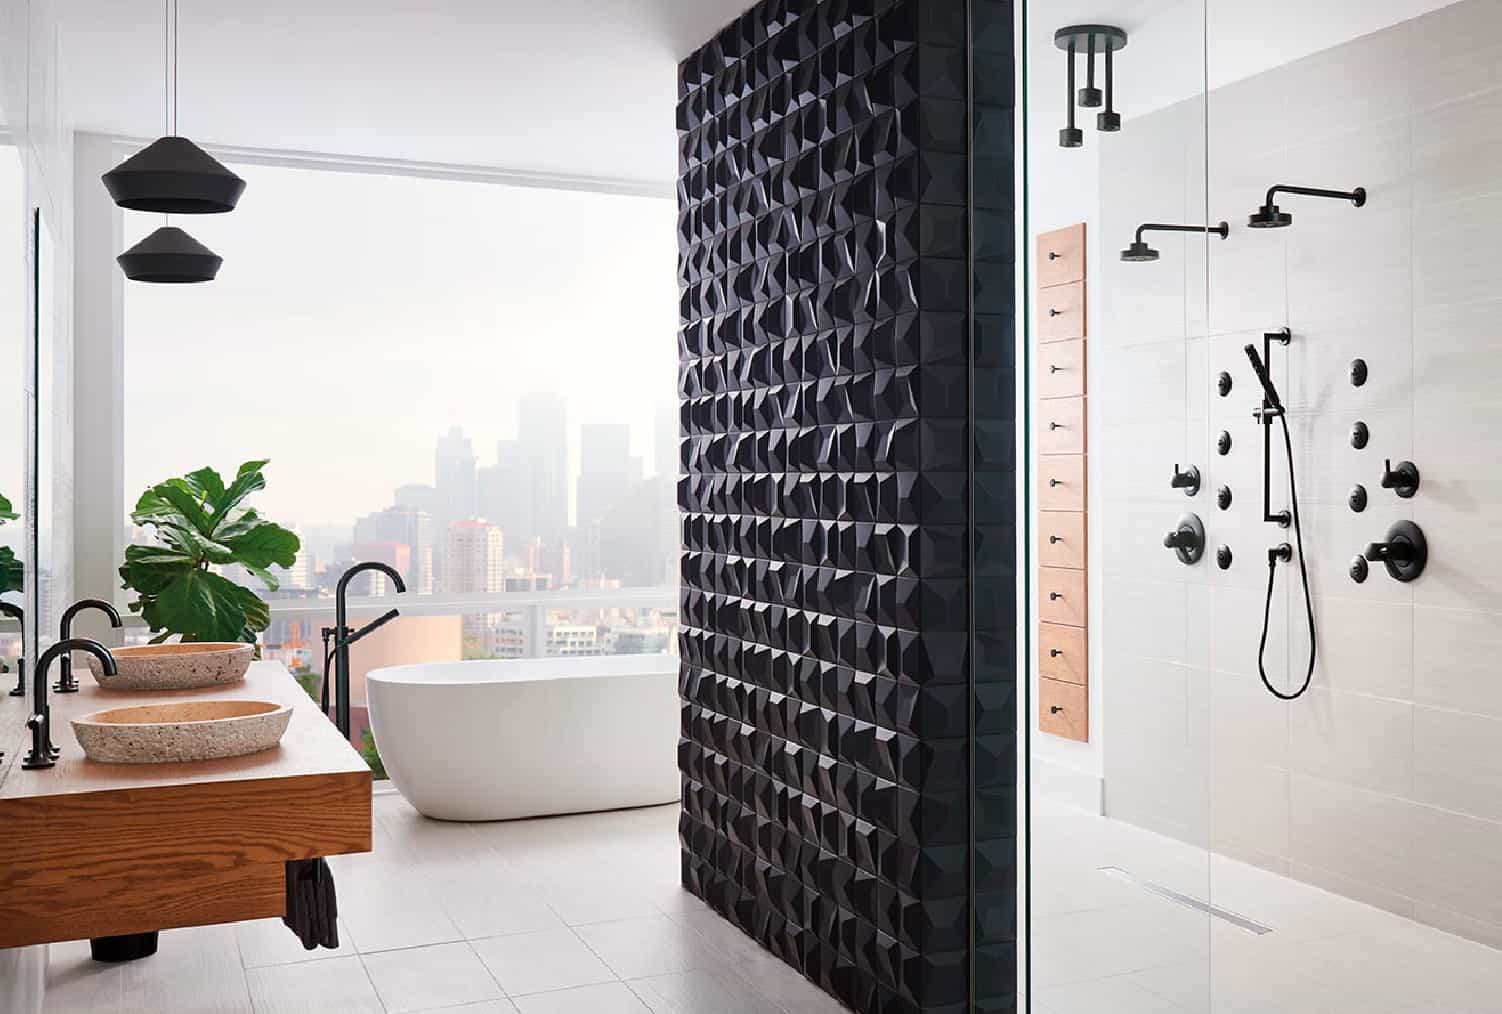 Mid-centruy modern bathroom design ideas including a black tiled wall with white and natural wood accents for the perfect bathroom inspiration